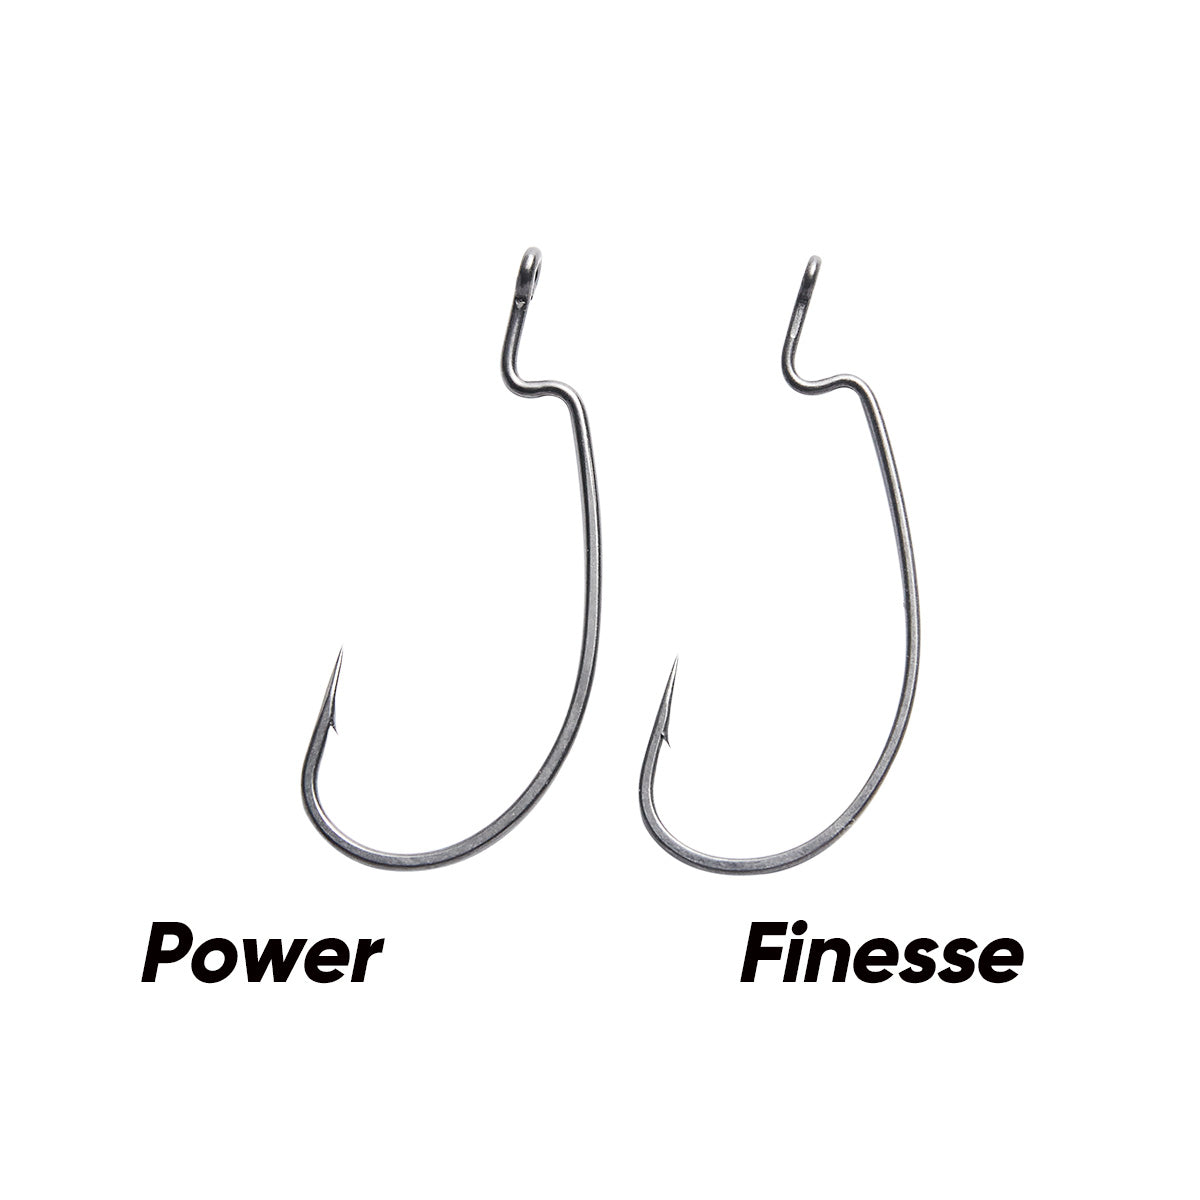 Shop 25-Piece Finesse EWG Hooks at the Best Price